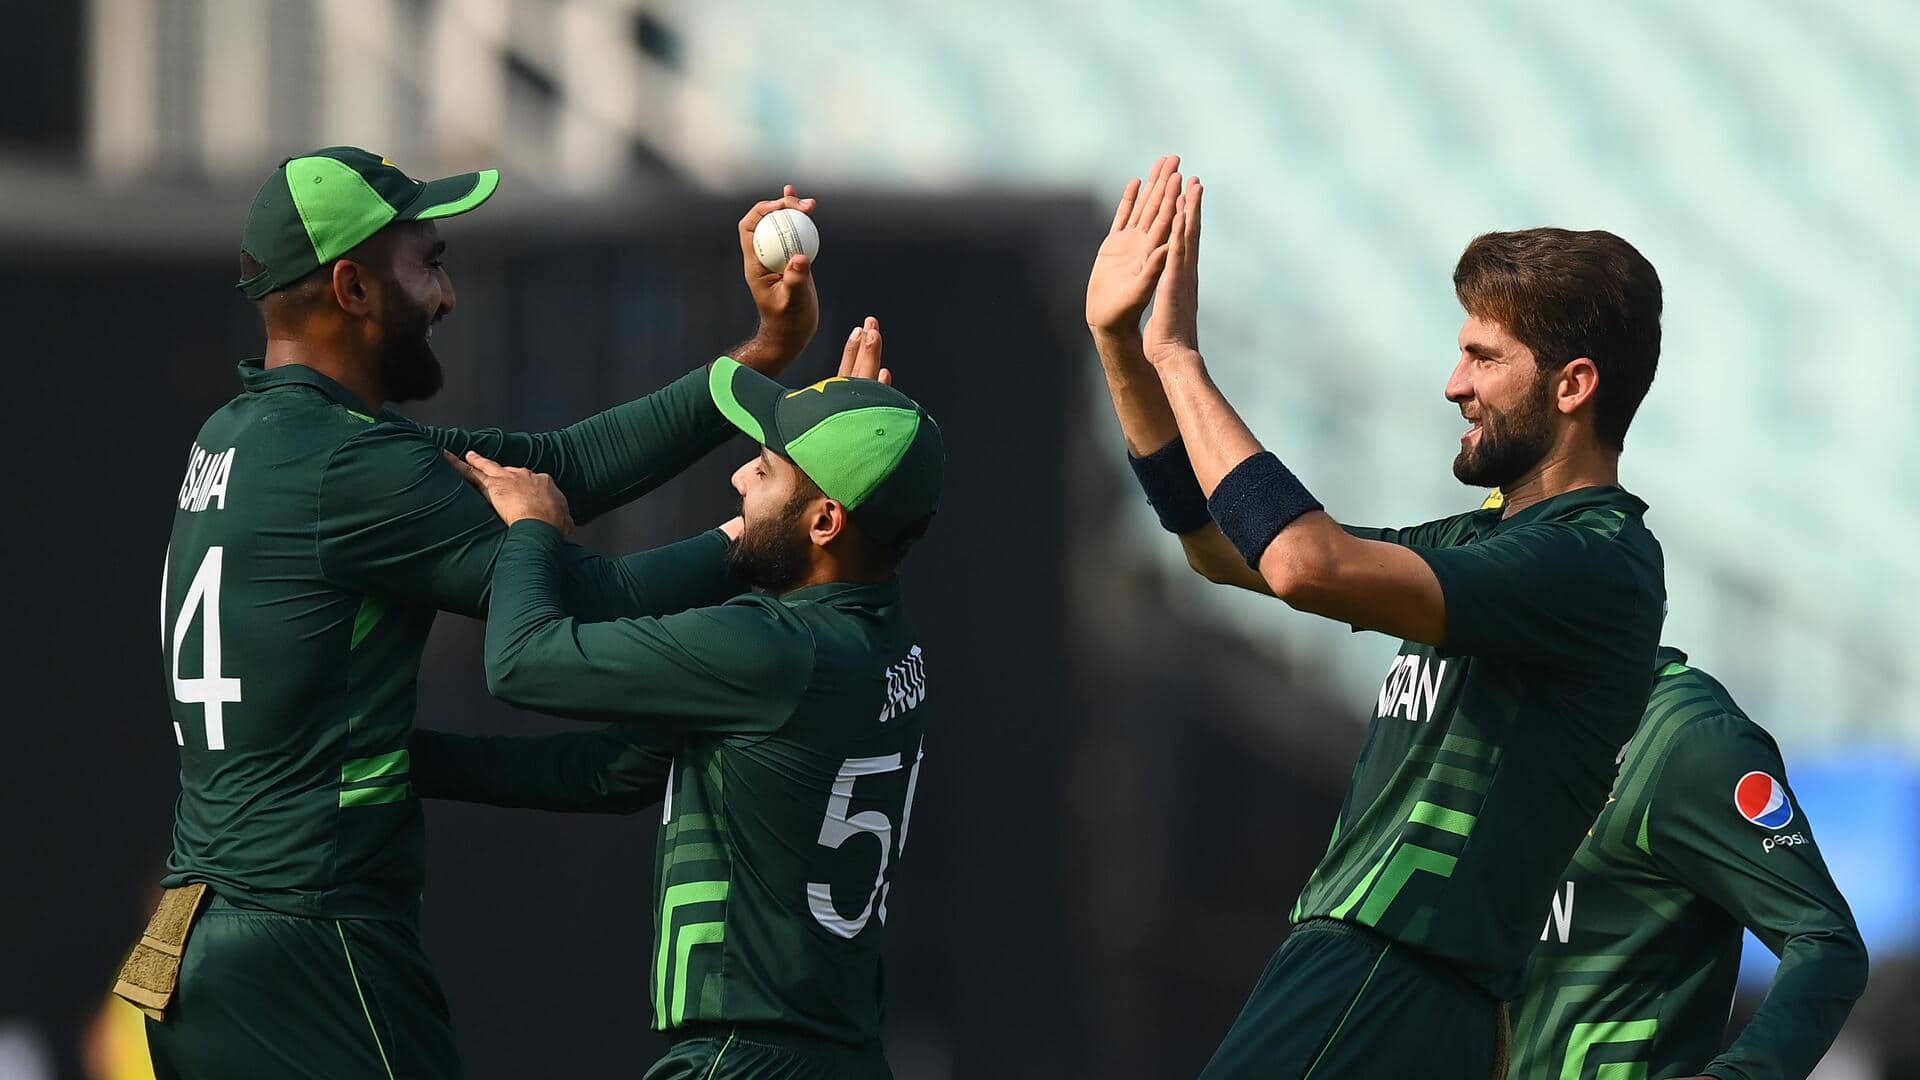 ICC Cricket World Cup, New Zealand vs Pakistan: Statistical preview